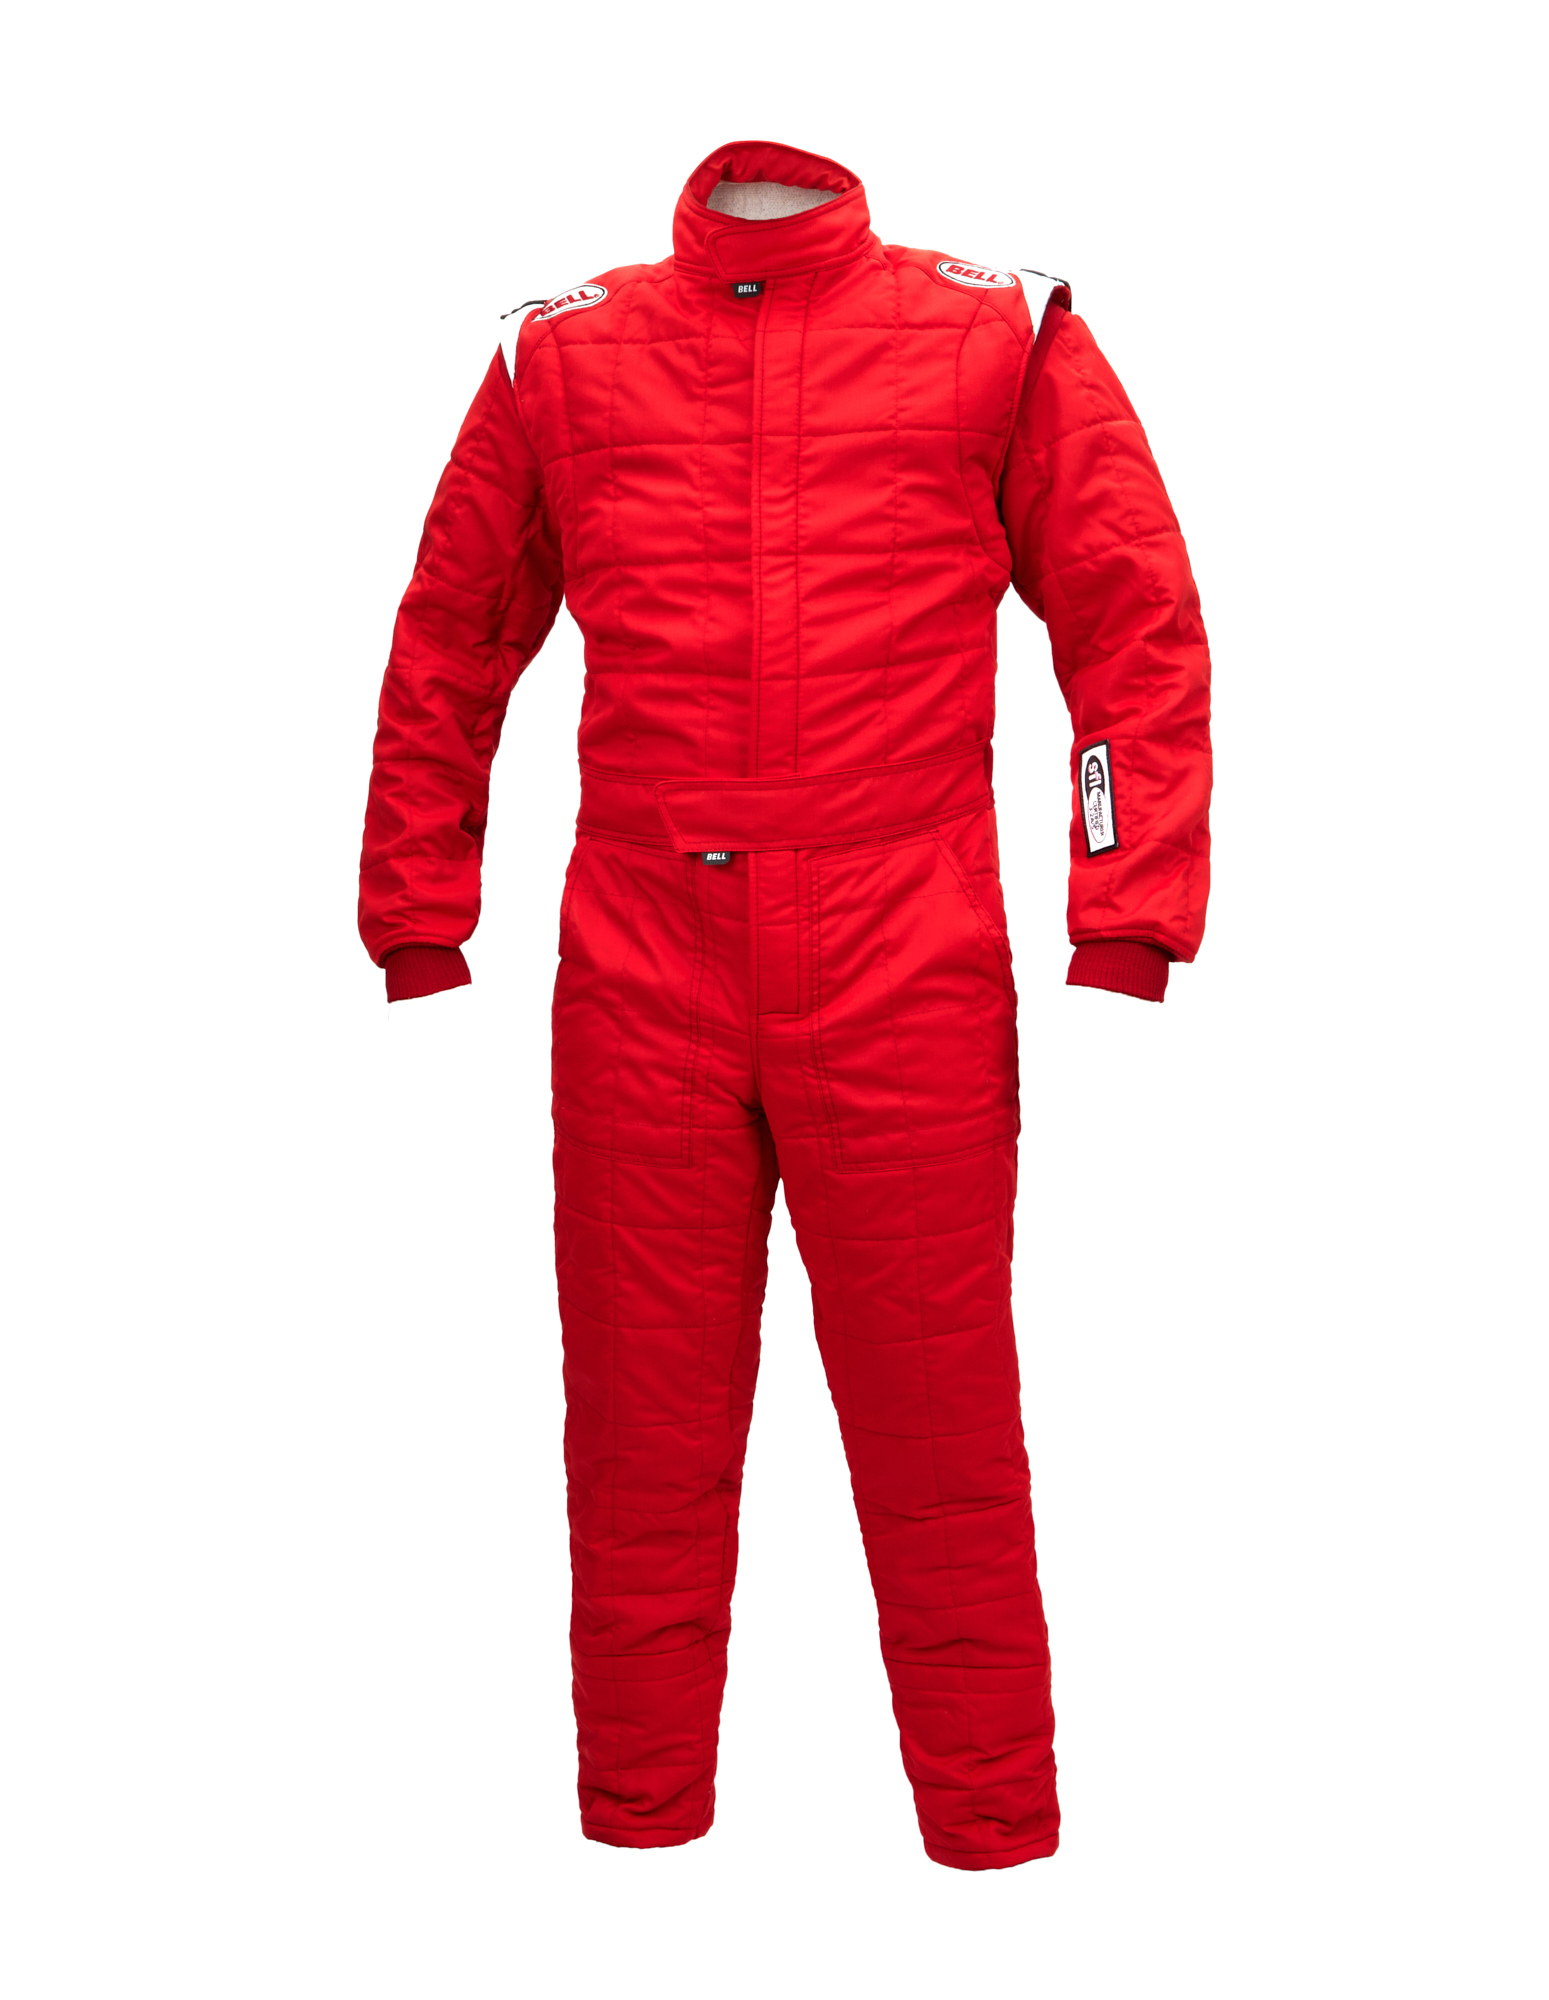 Bell Sport-TX Suit Red X Large (58-60) SFI 3.2A/5 - BR10074